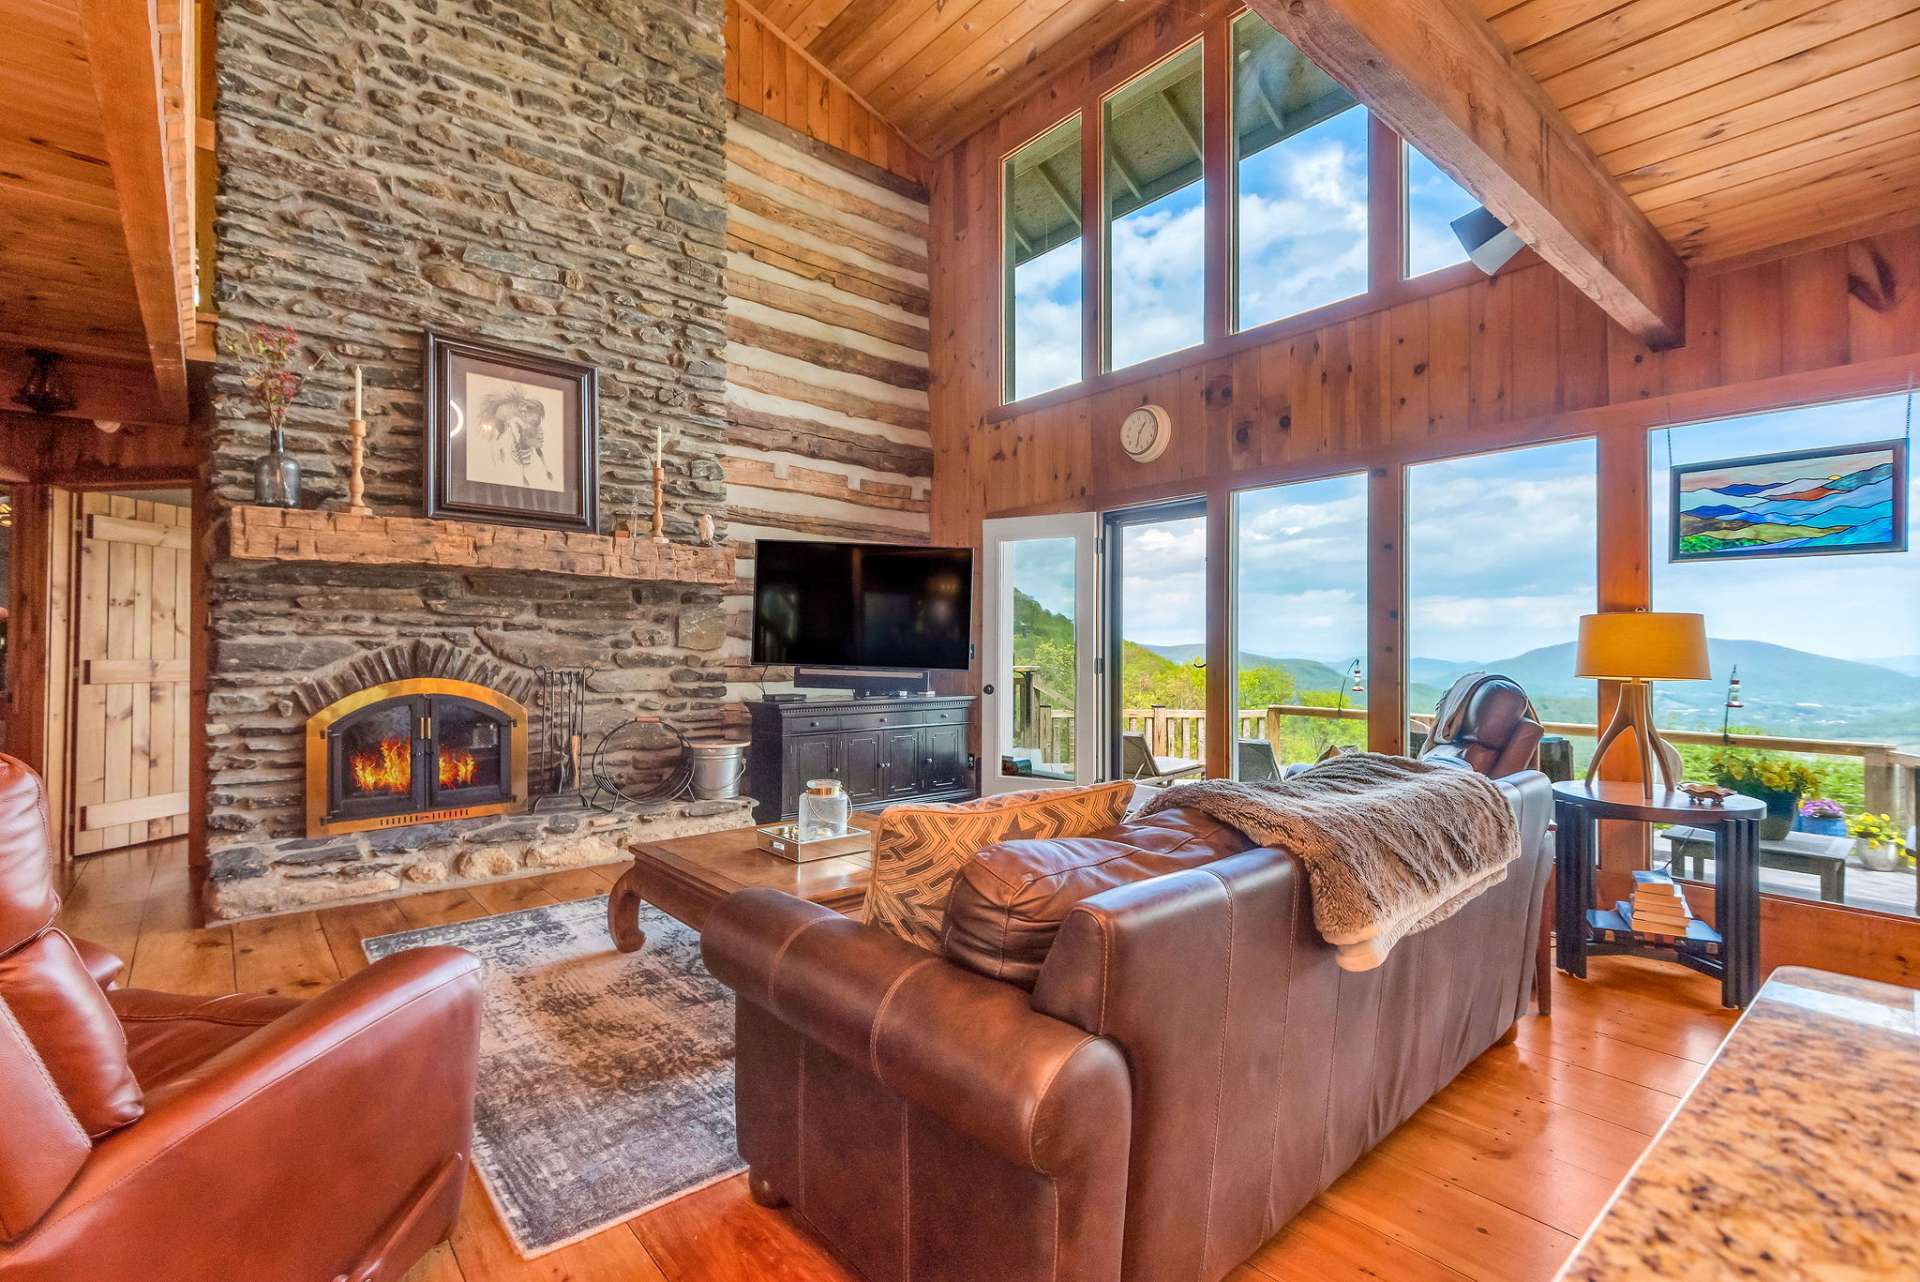 This home offers views from every angle, and natural light abounds throughout.


















































Massive native stone fireplace highlights the cathedral ceilings.